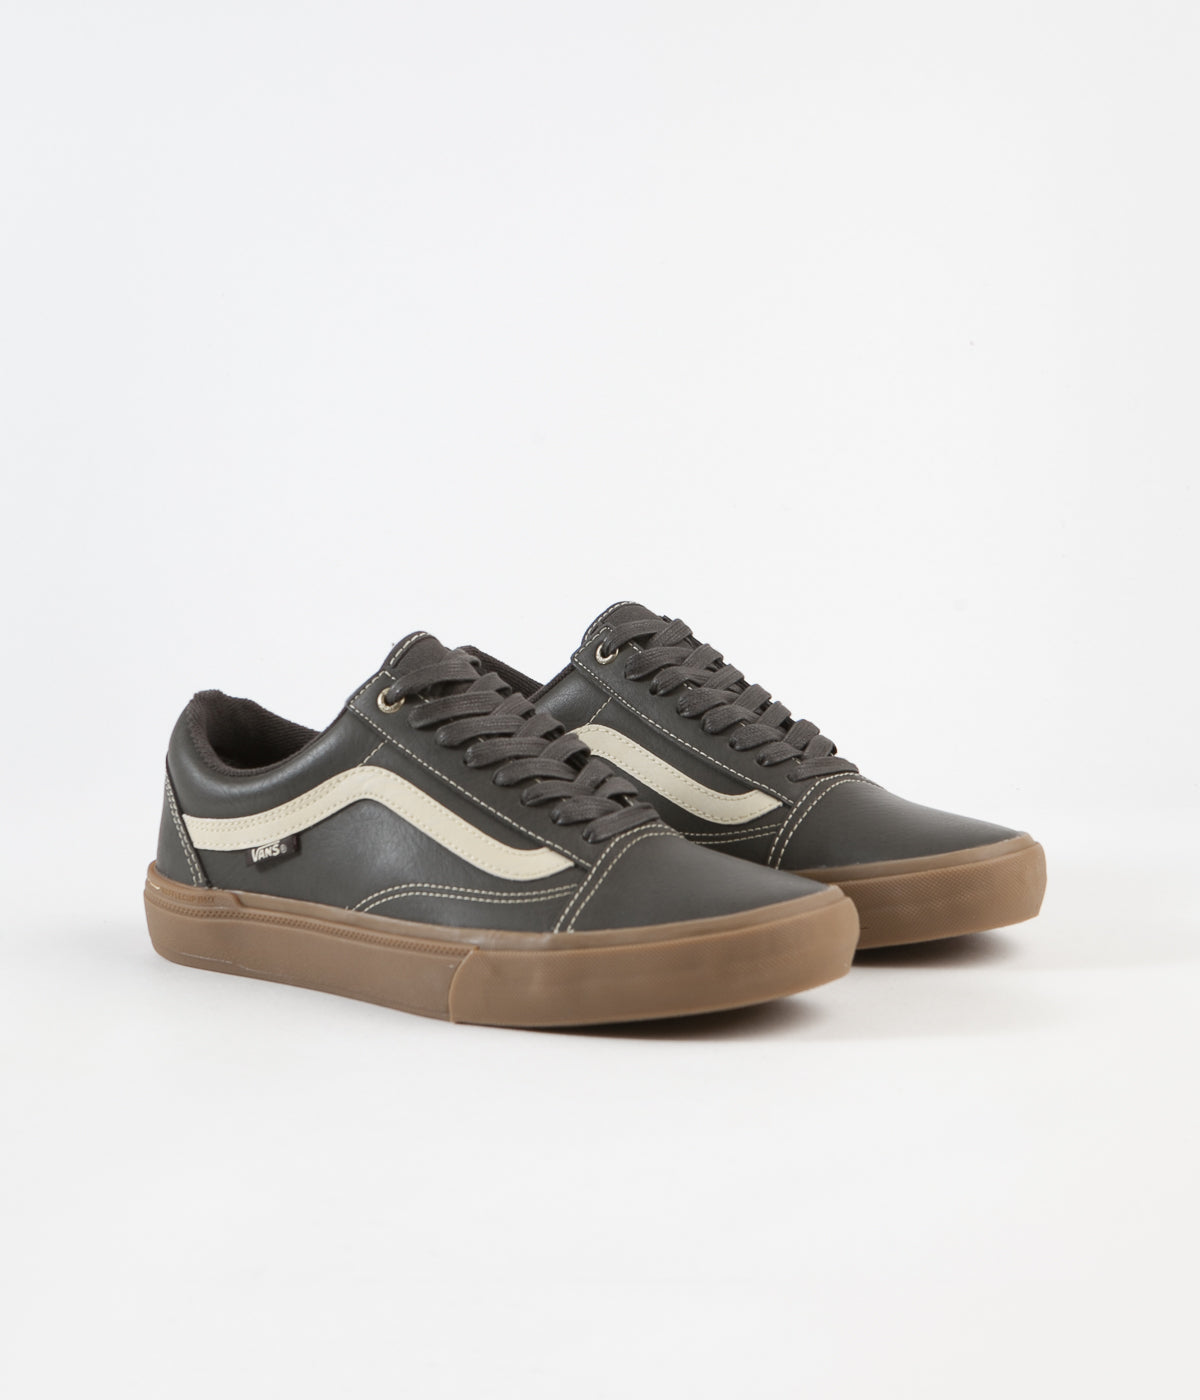 Vans BMX Style 114 Shoes - Dark Olive – Route One